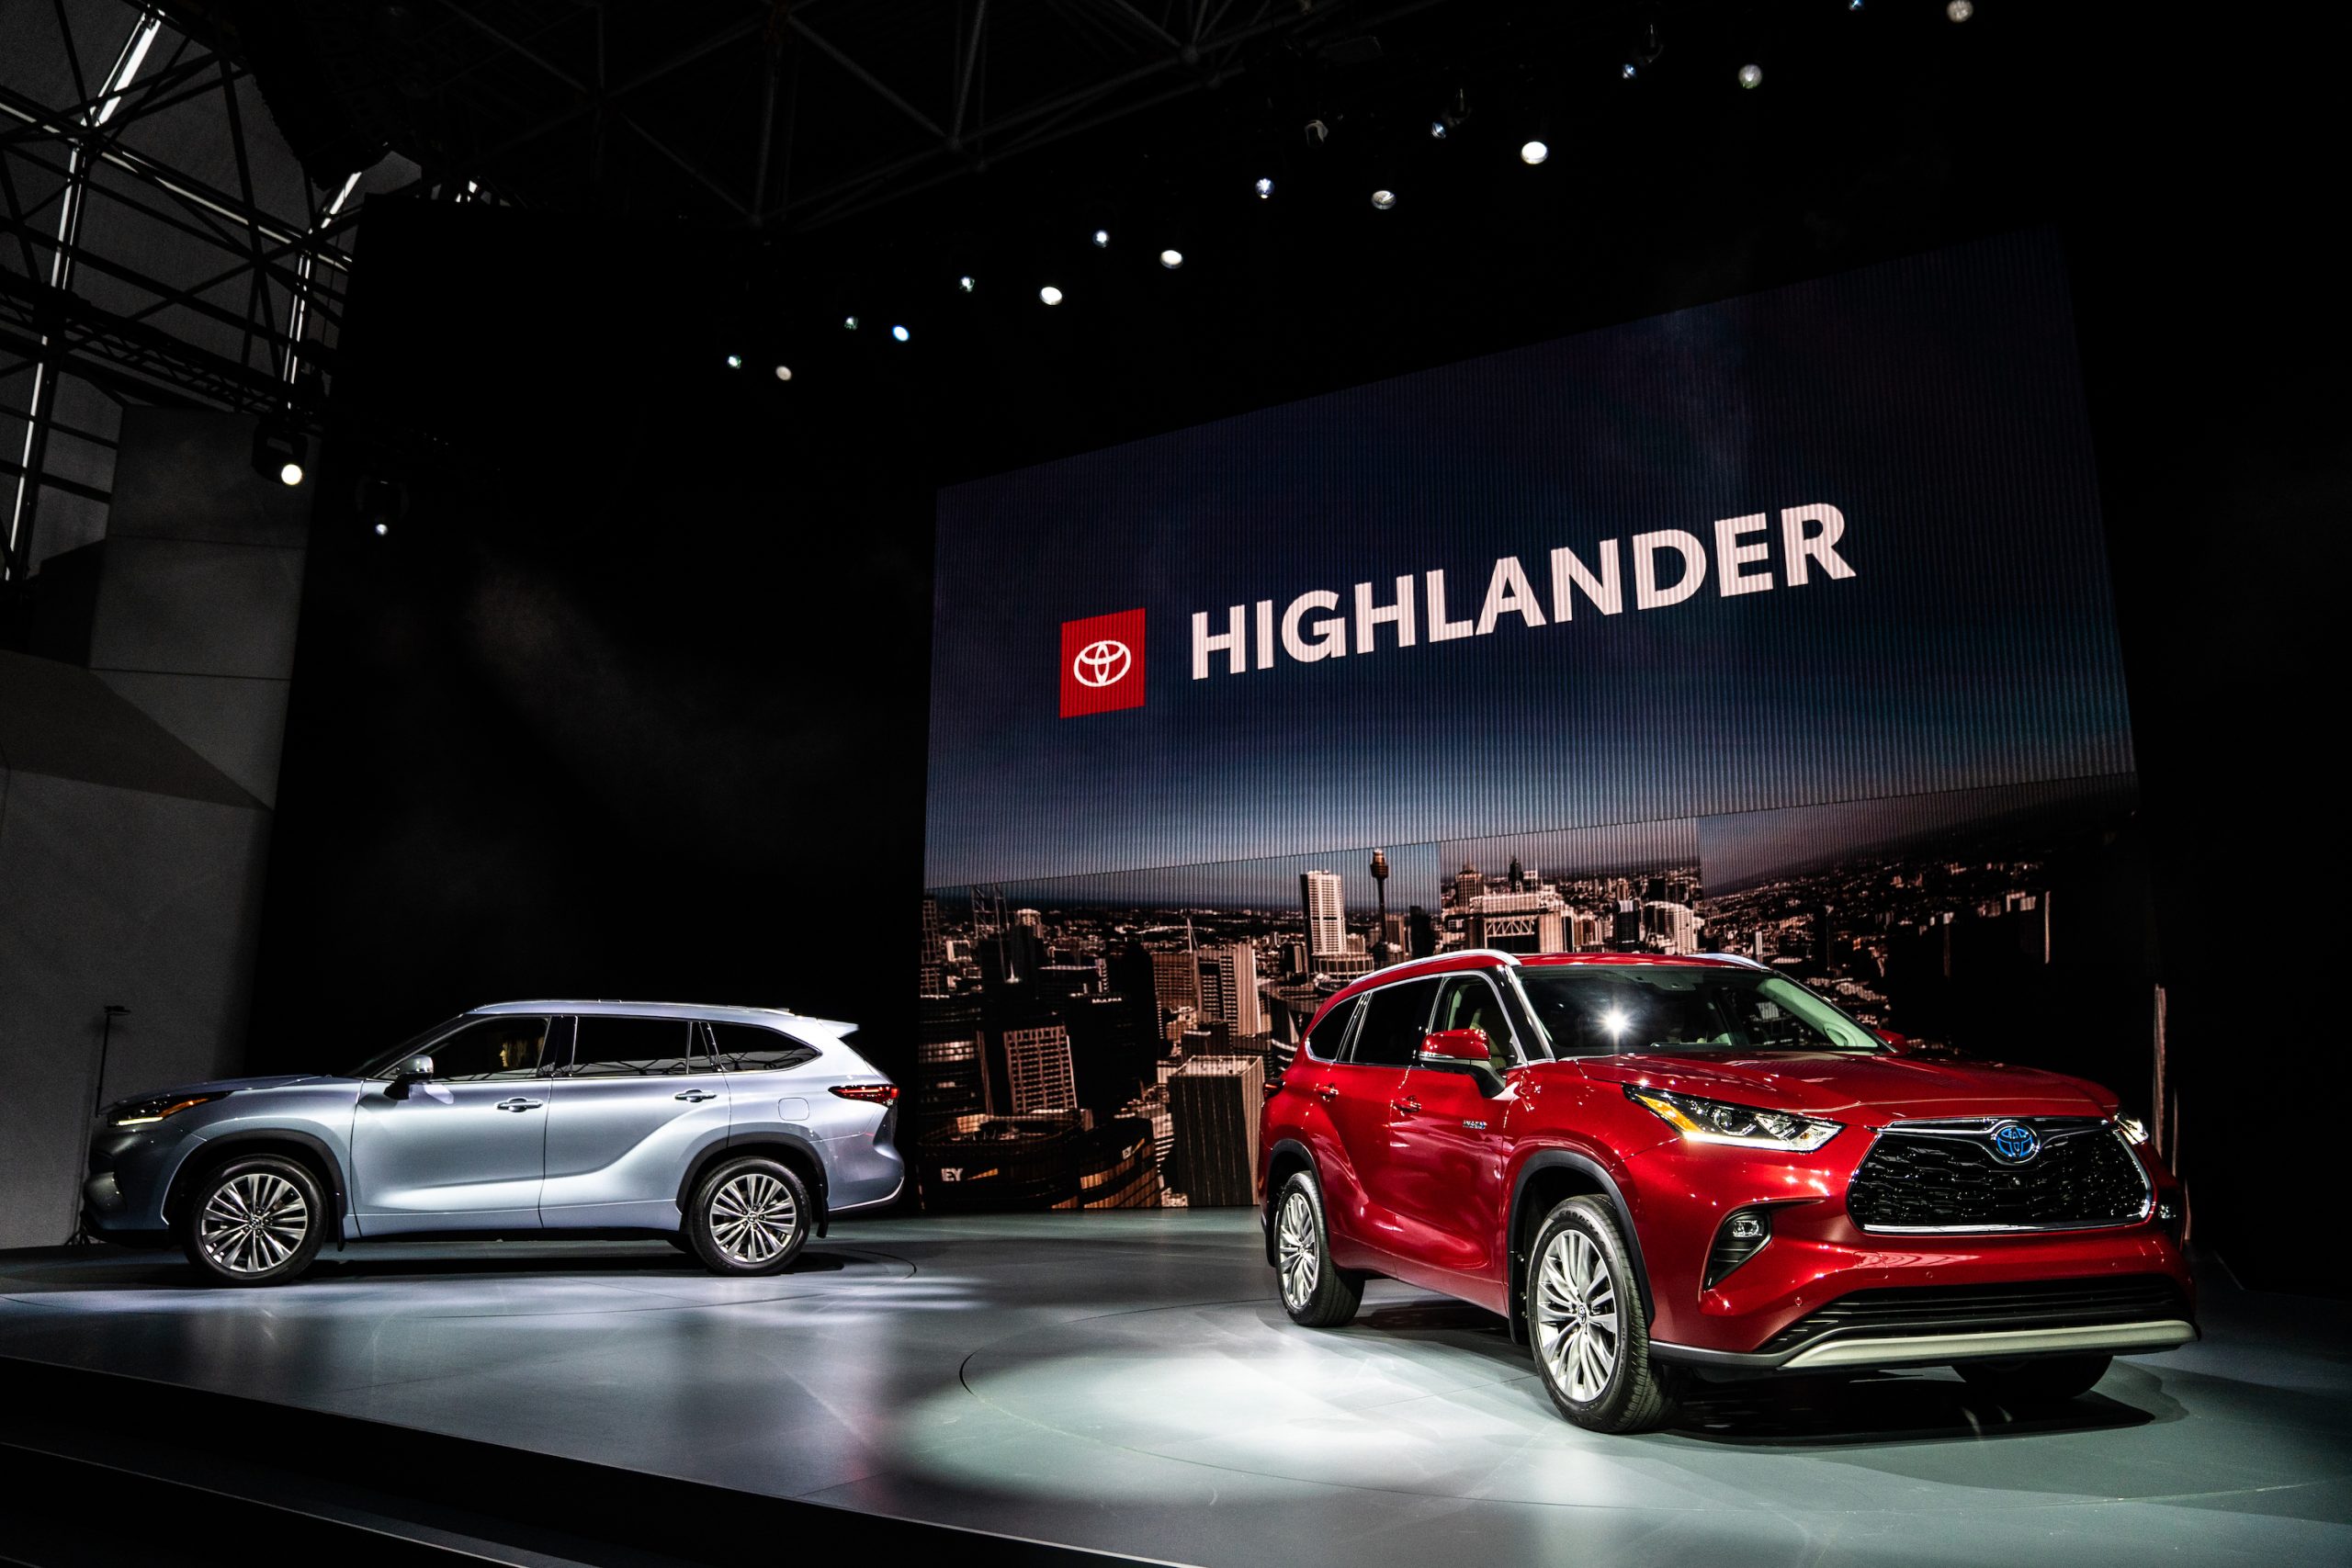 Toyota Motor Corp. Highlander sports utility vehicles (SUV) are displayed during the 2019 New York International Auto Show